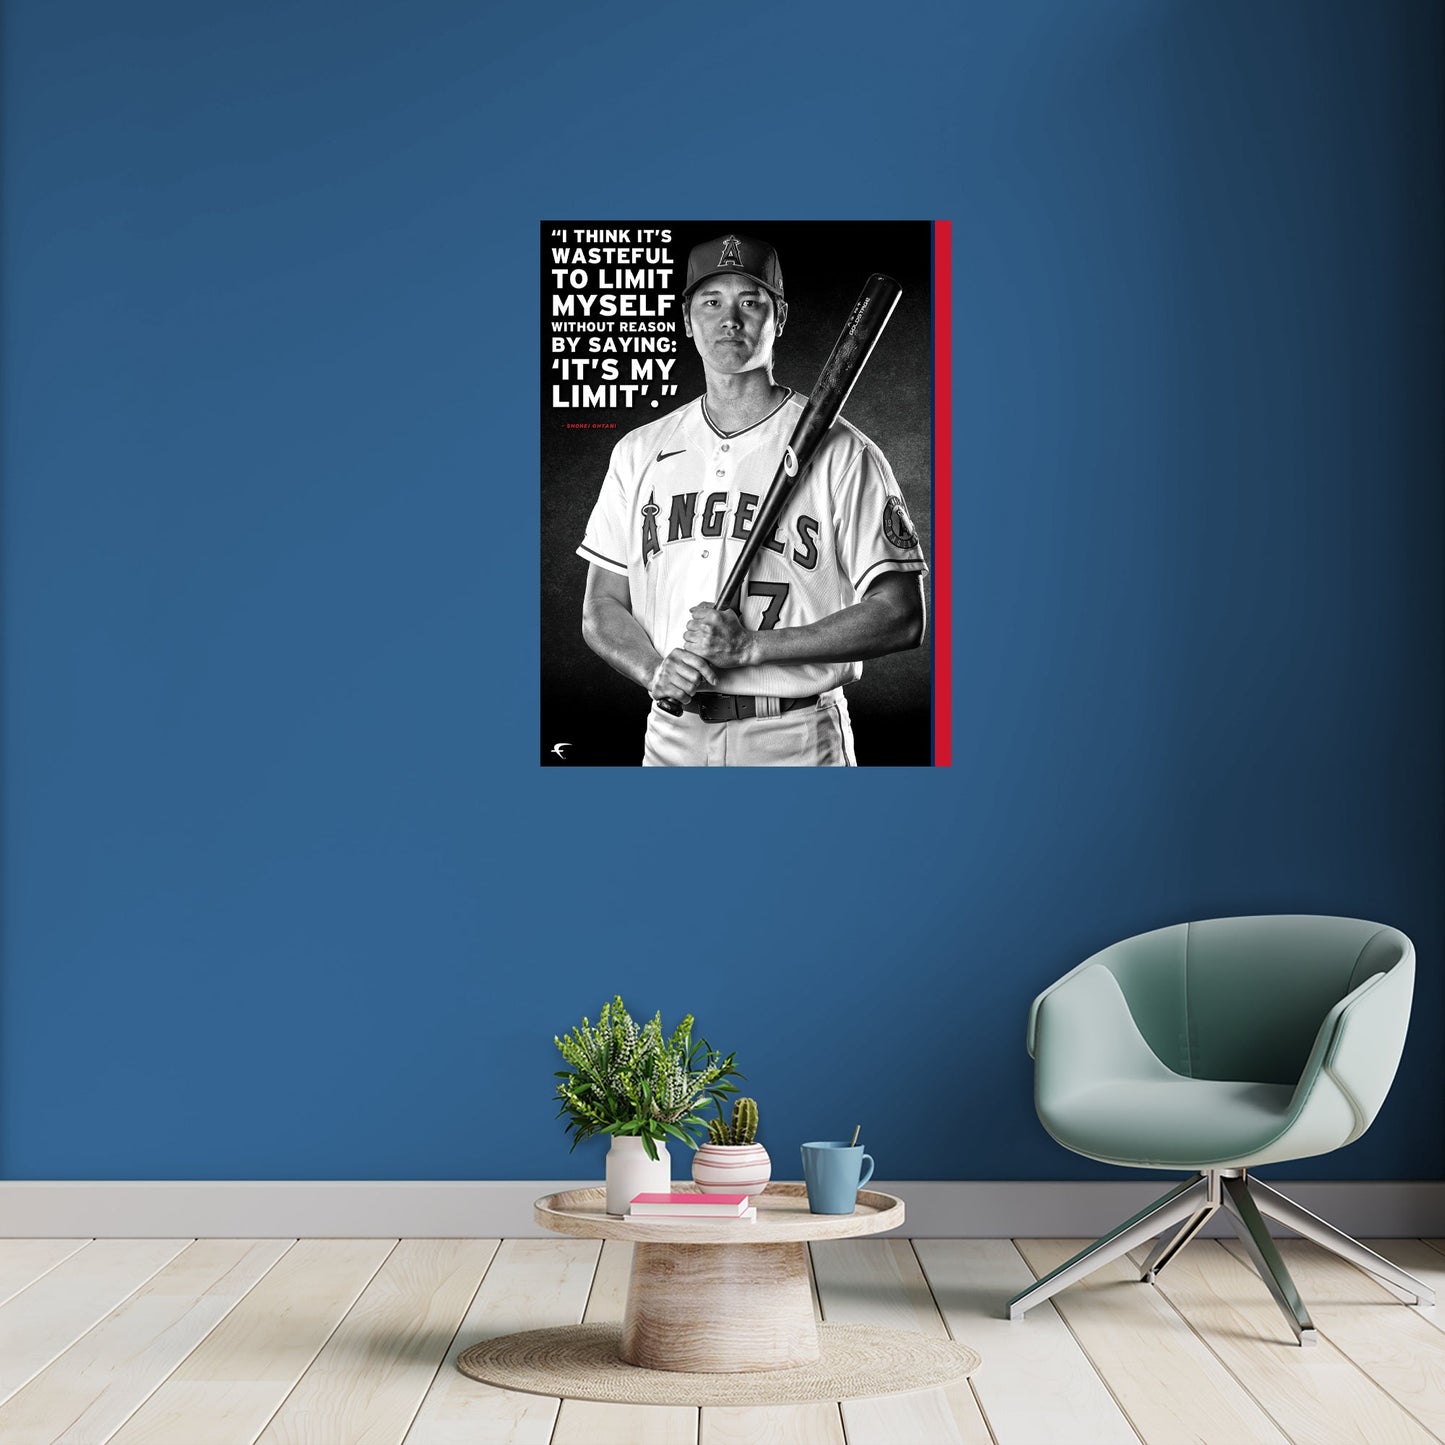 Los Angeles Angels: Shohei Ohtani Inspirational Poster - Officially Licensed MLB Removable Adhesive Decal